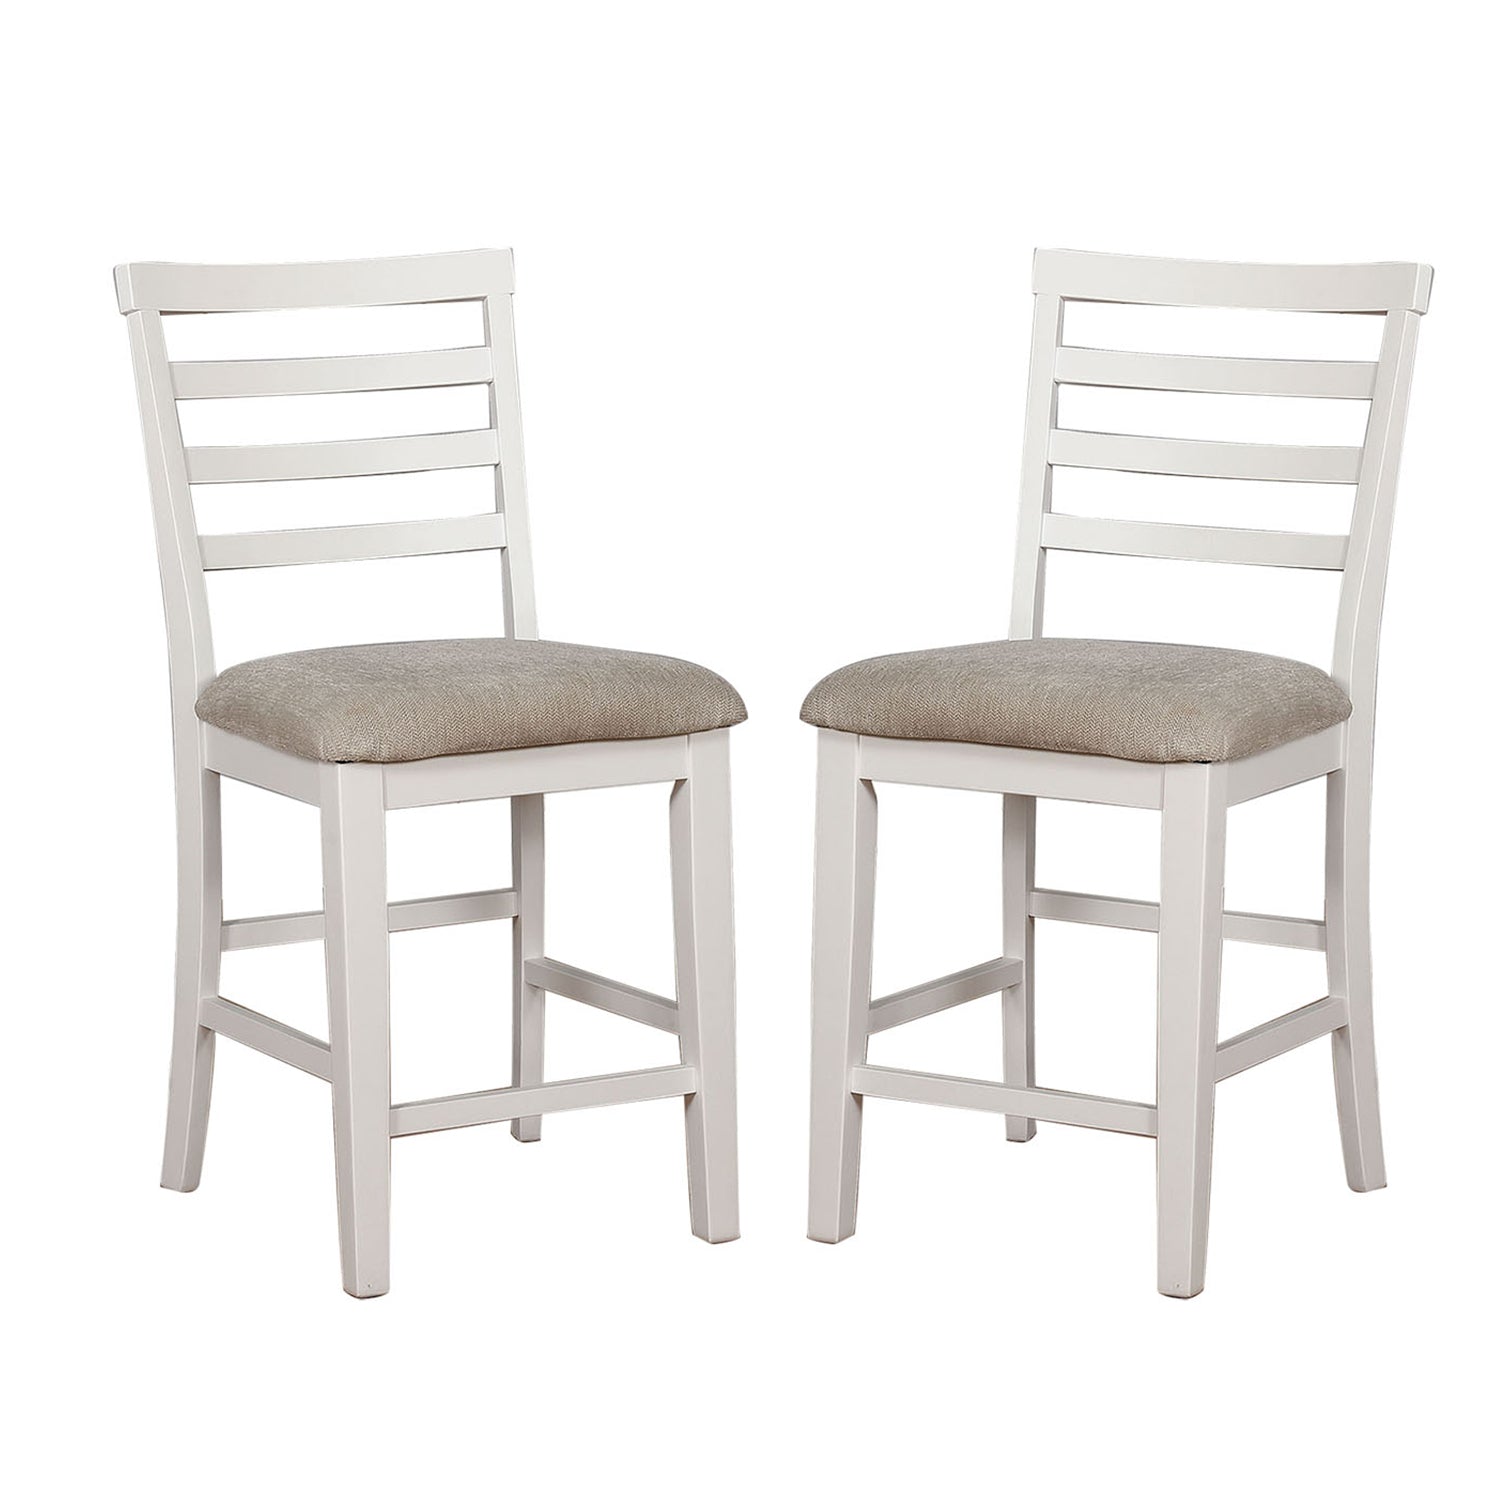 Set of 2 Padded Fabric Counter Height Chairs in White